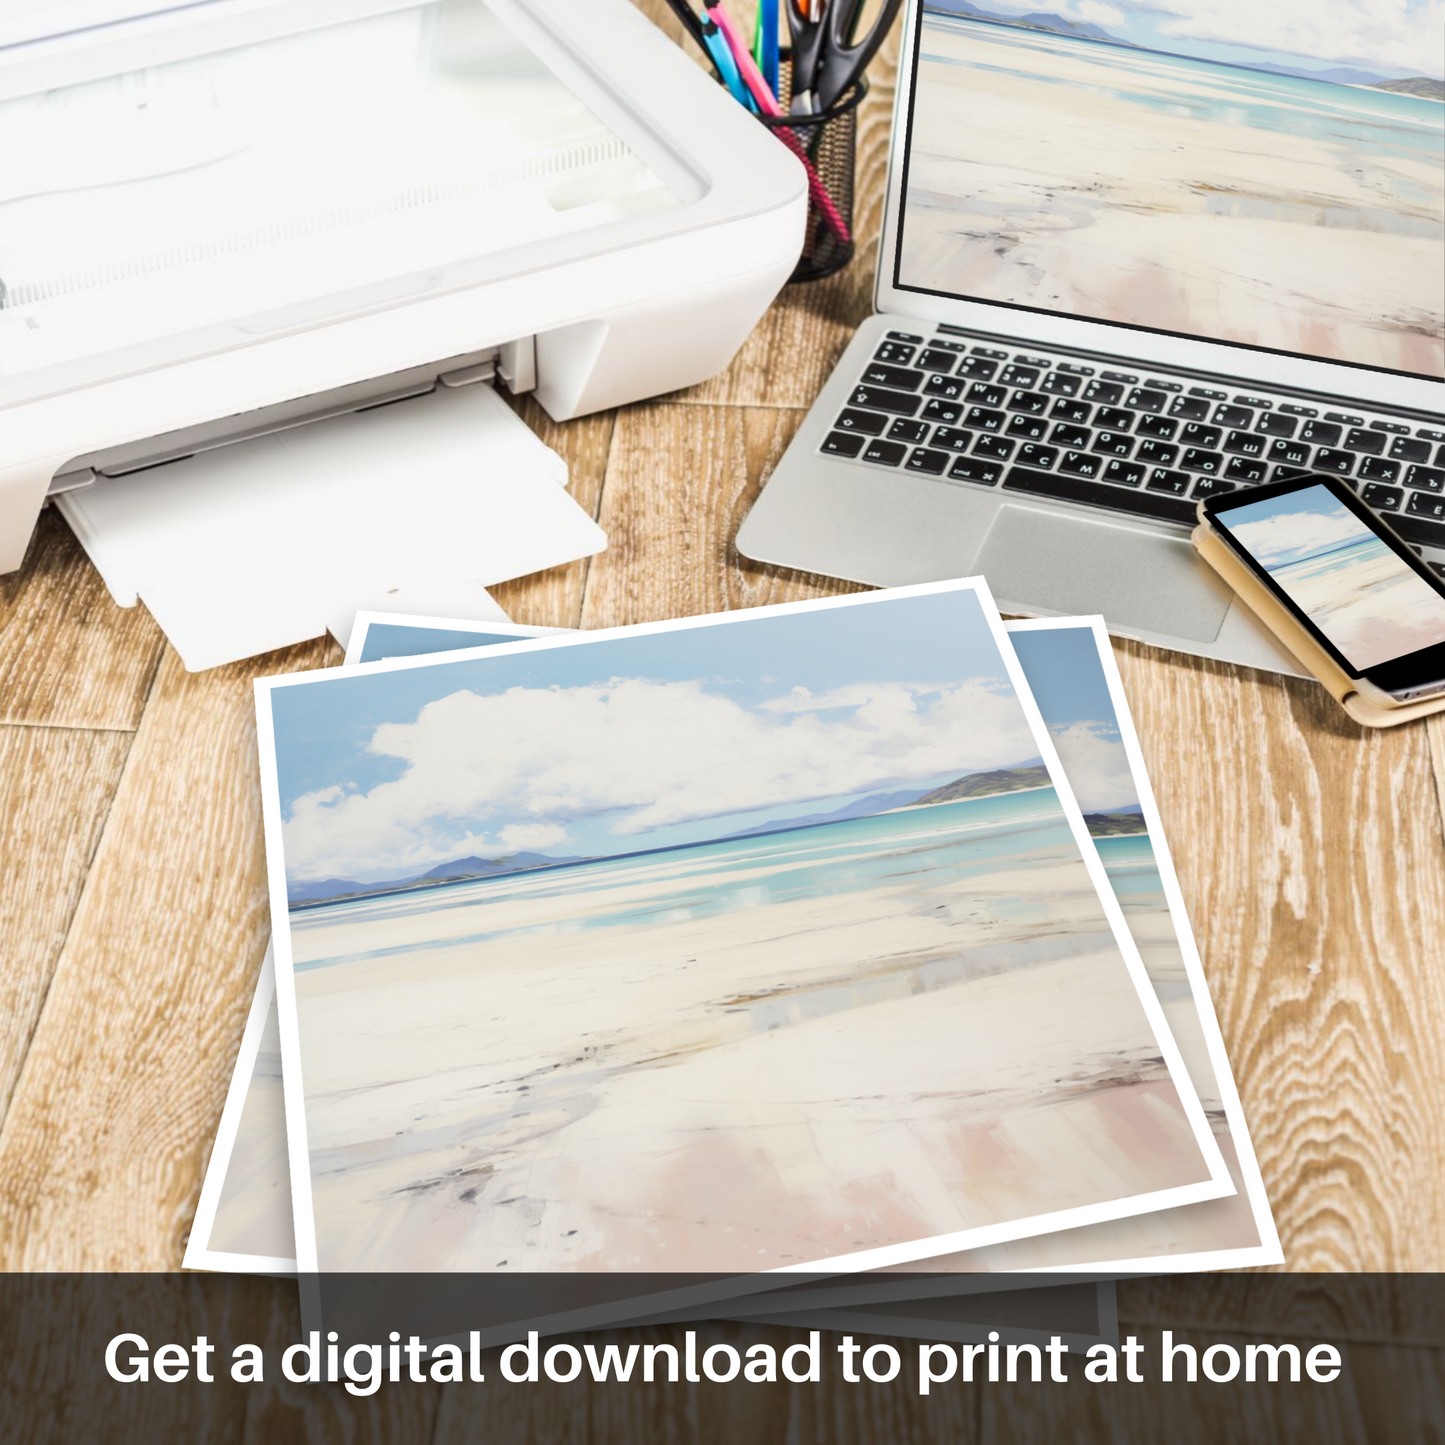 Downloadable and printable picture of Camusdarach Beach, Arisaig